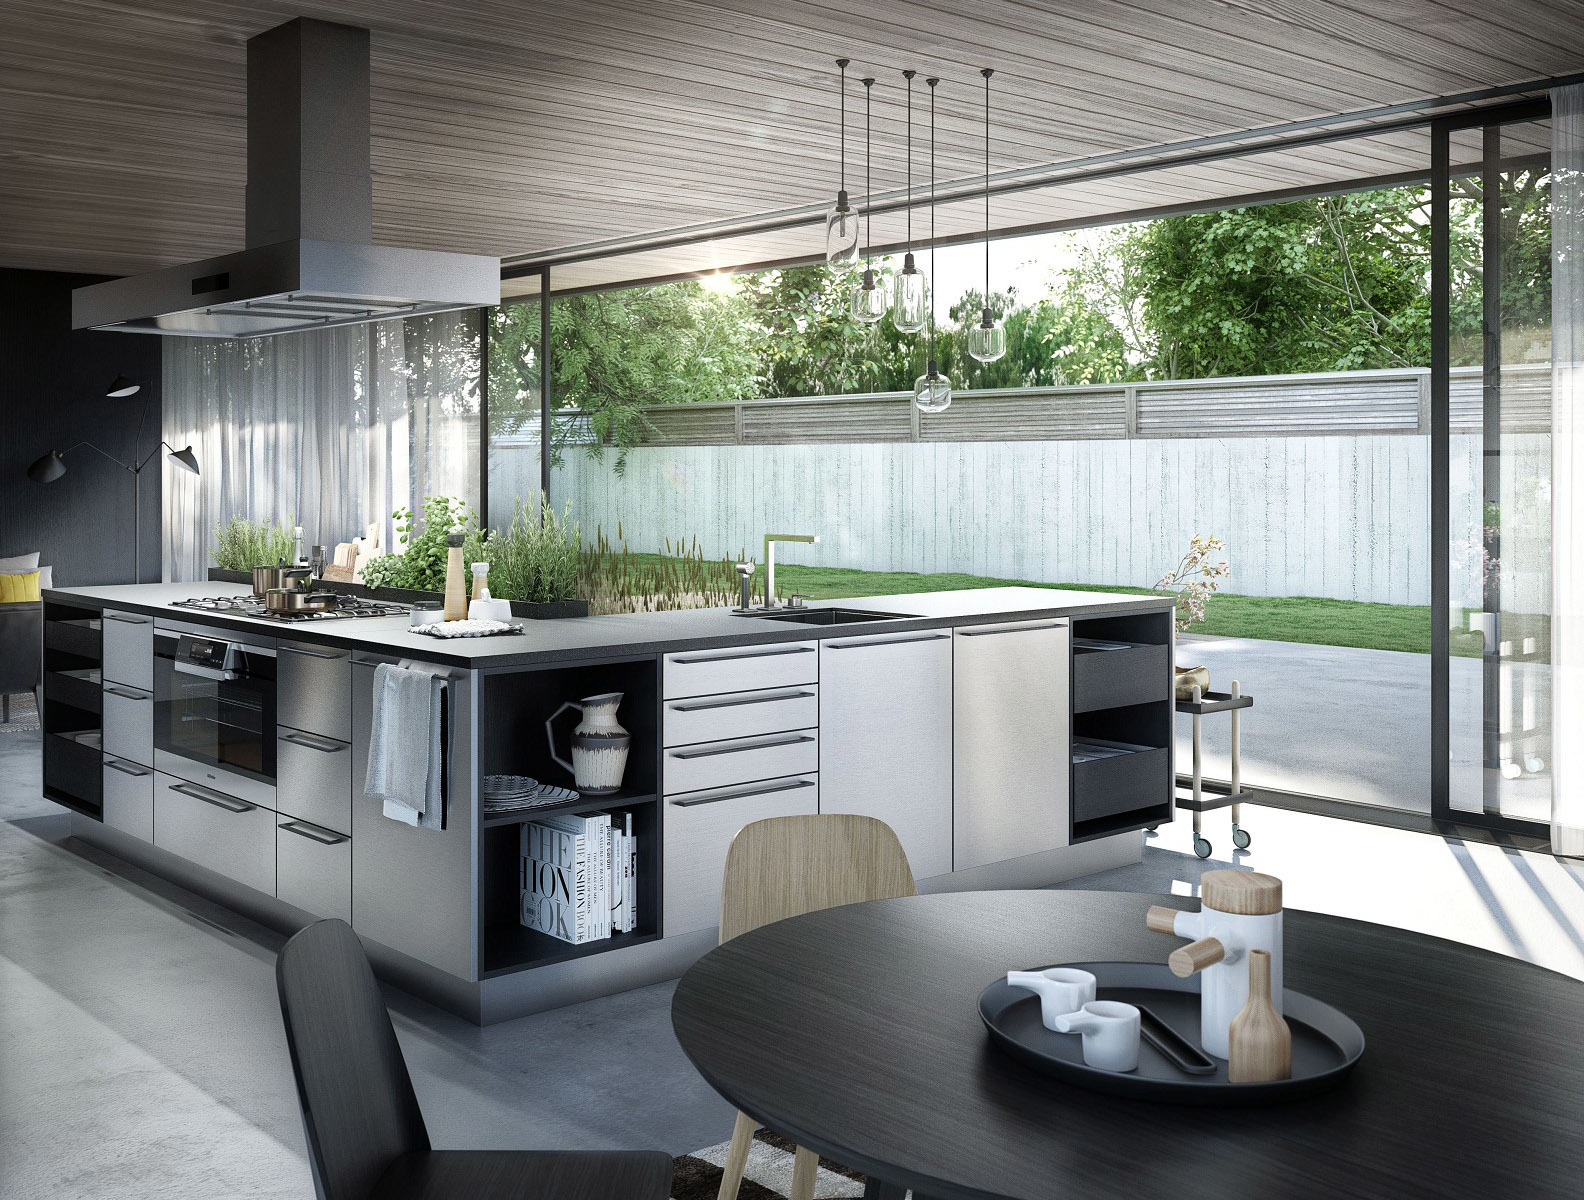 SieMatic Urban SE kitchen island in graphite oak and stainless steel with herb garden and breakfast bar